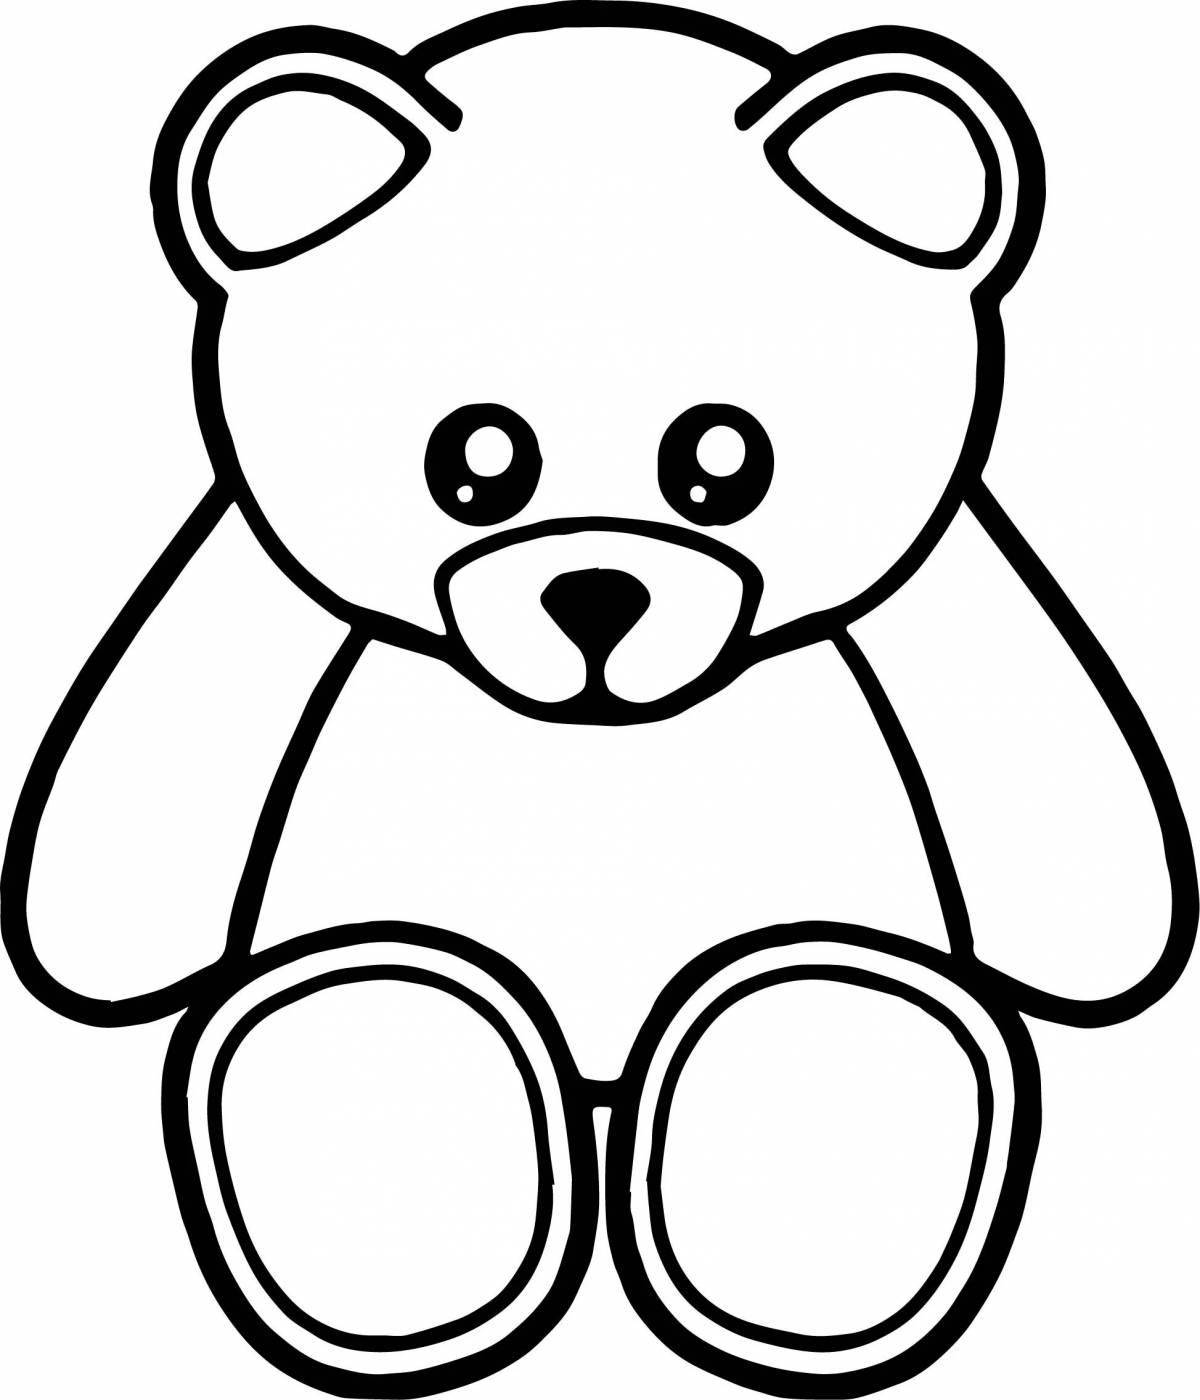 Sunny teddy bear coloring page